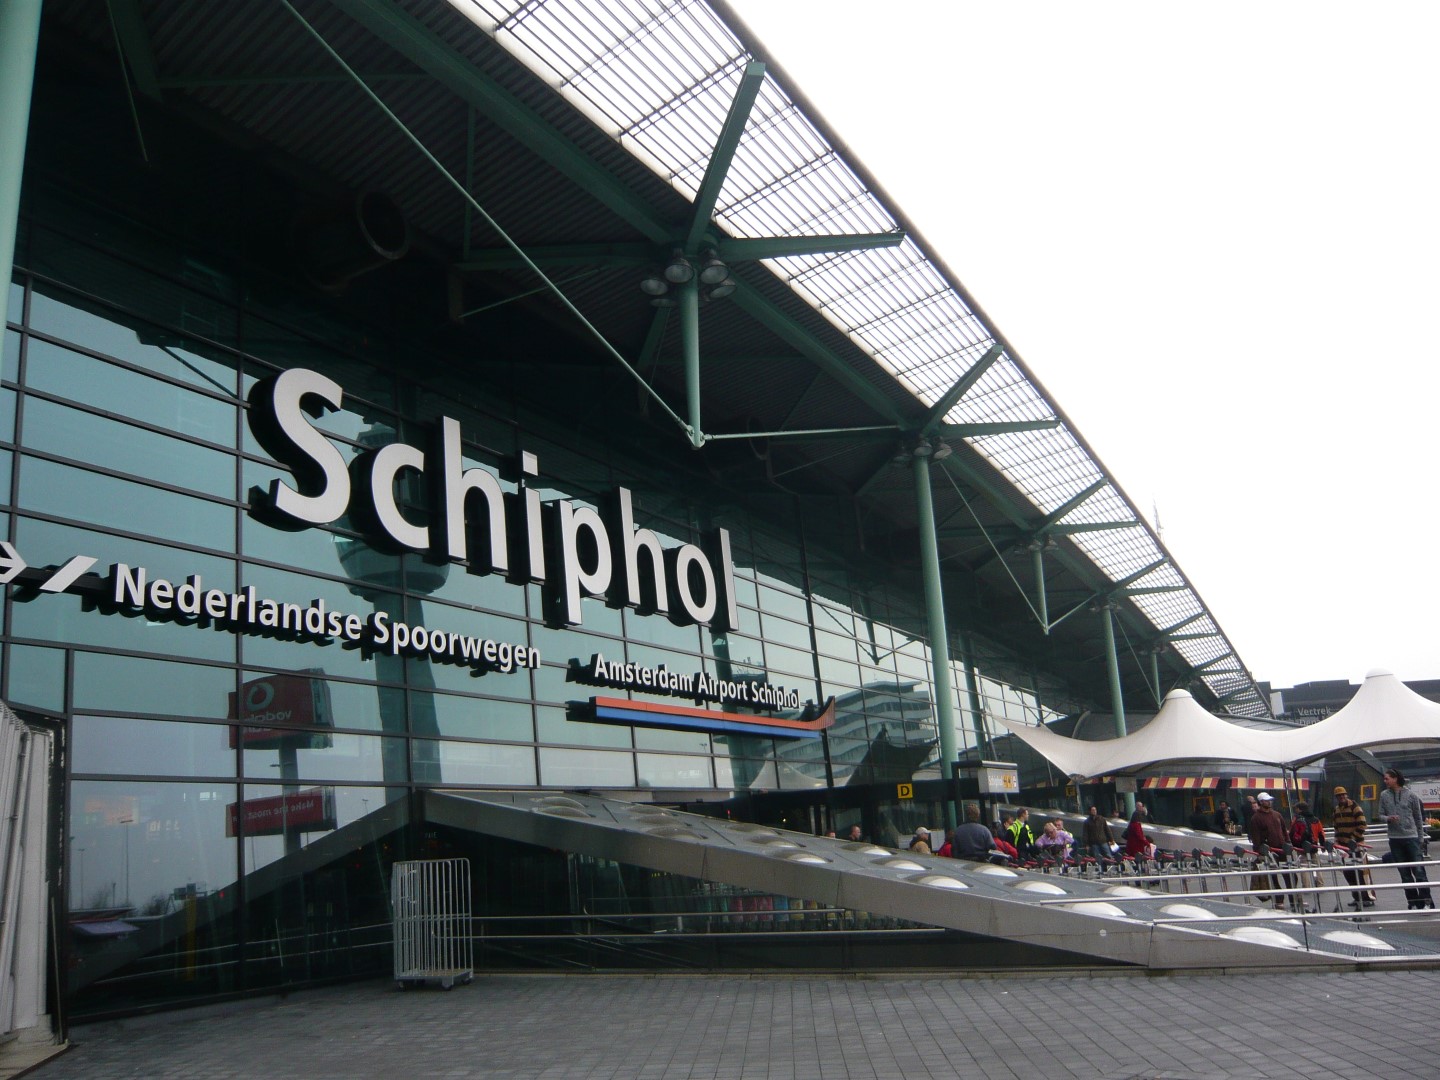 Schiphol Airport Robbery 2005 $118 Million